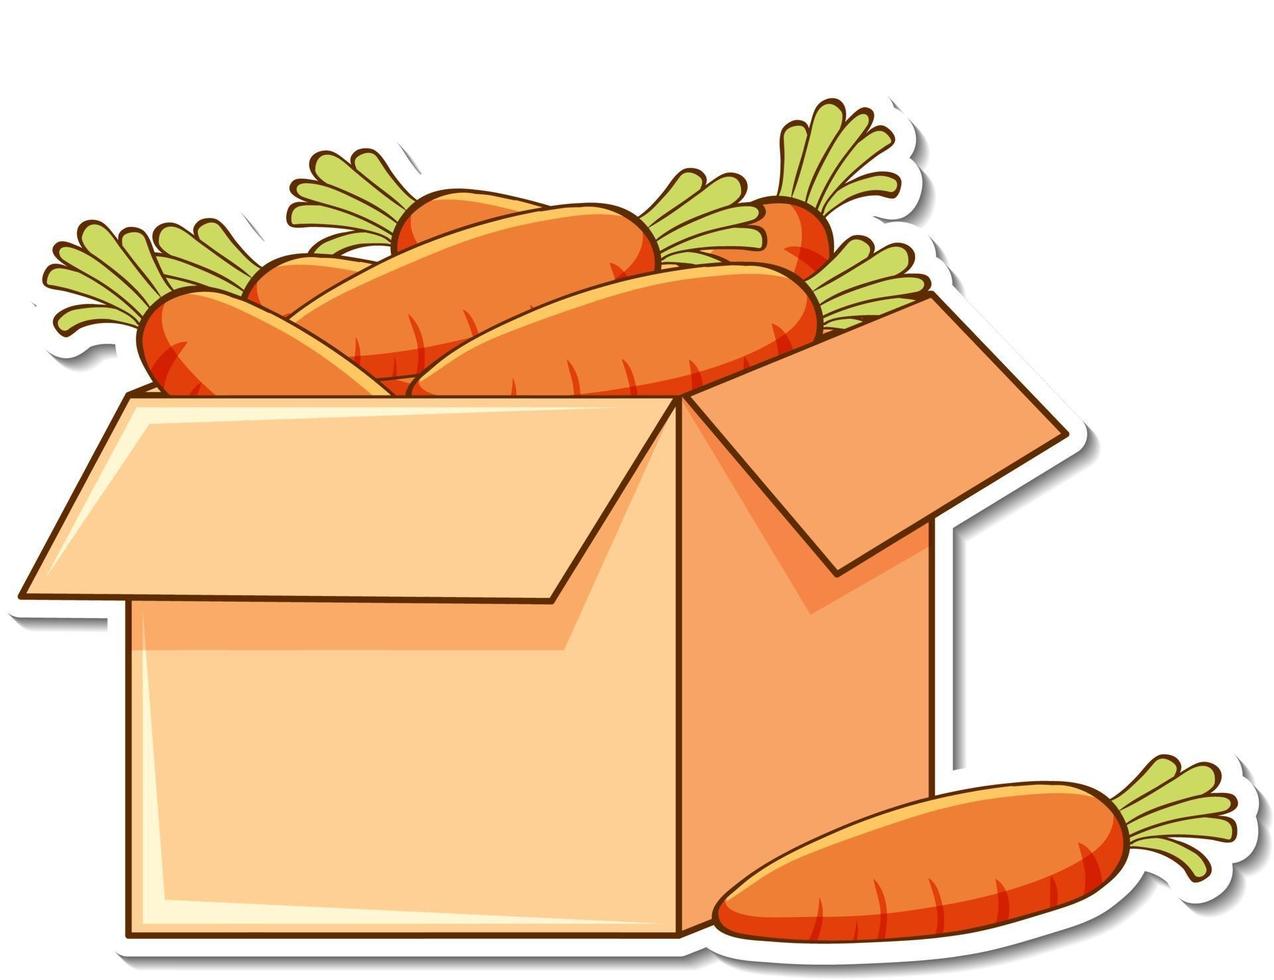 Sticker template with many carrots in a box vector